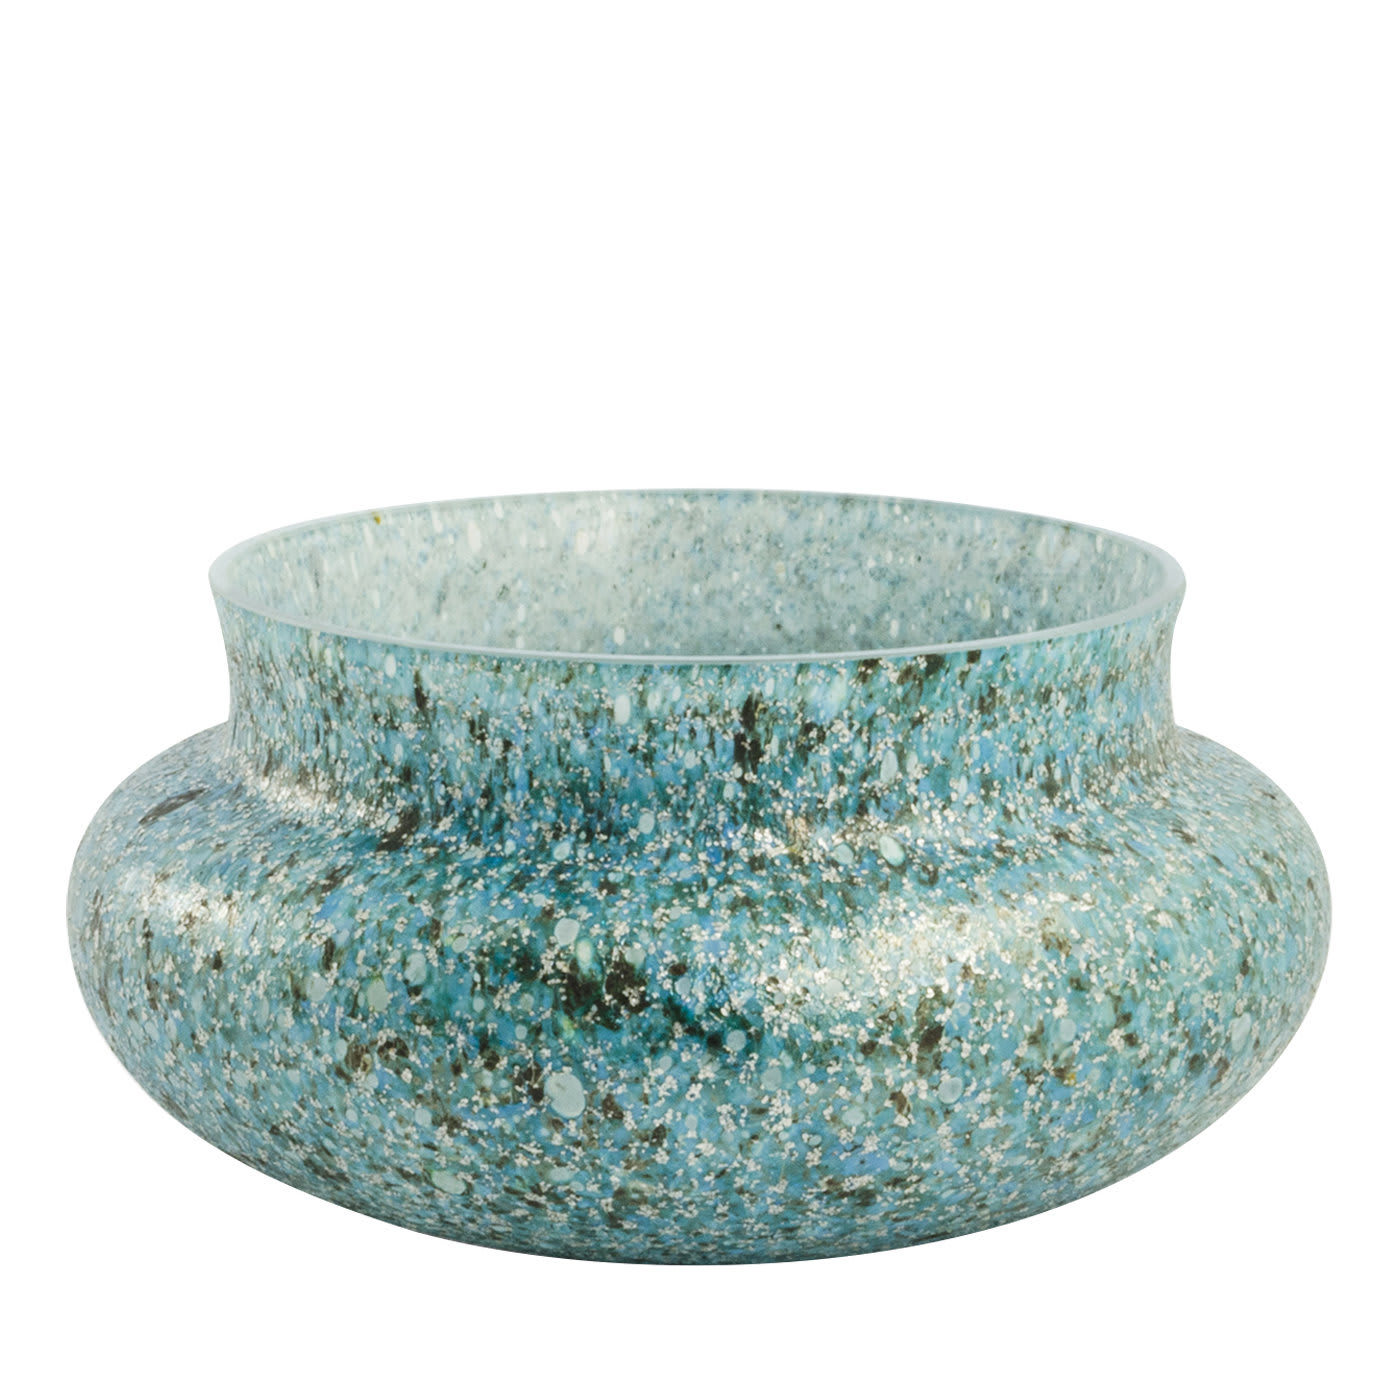 Tintoretto Large Green Bowl - Dogale